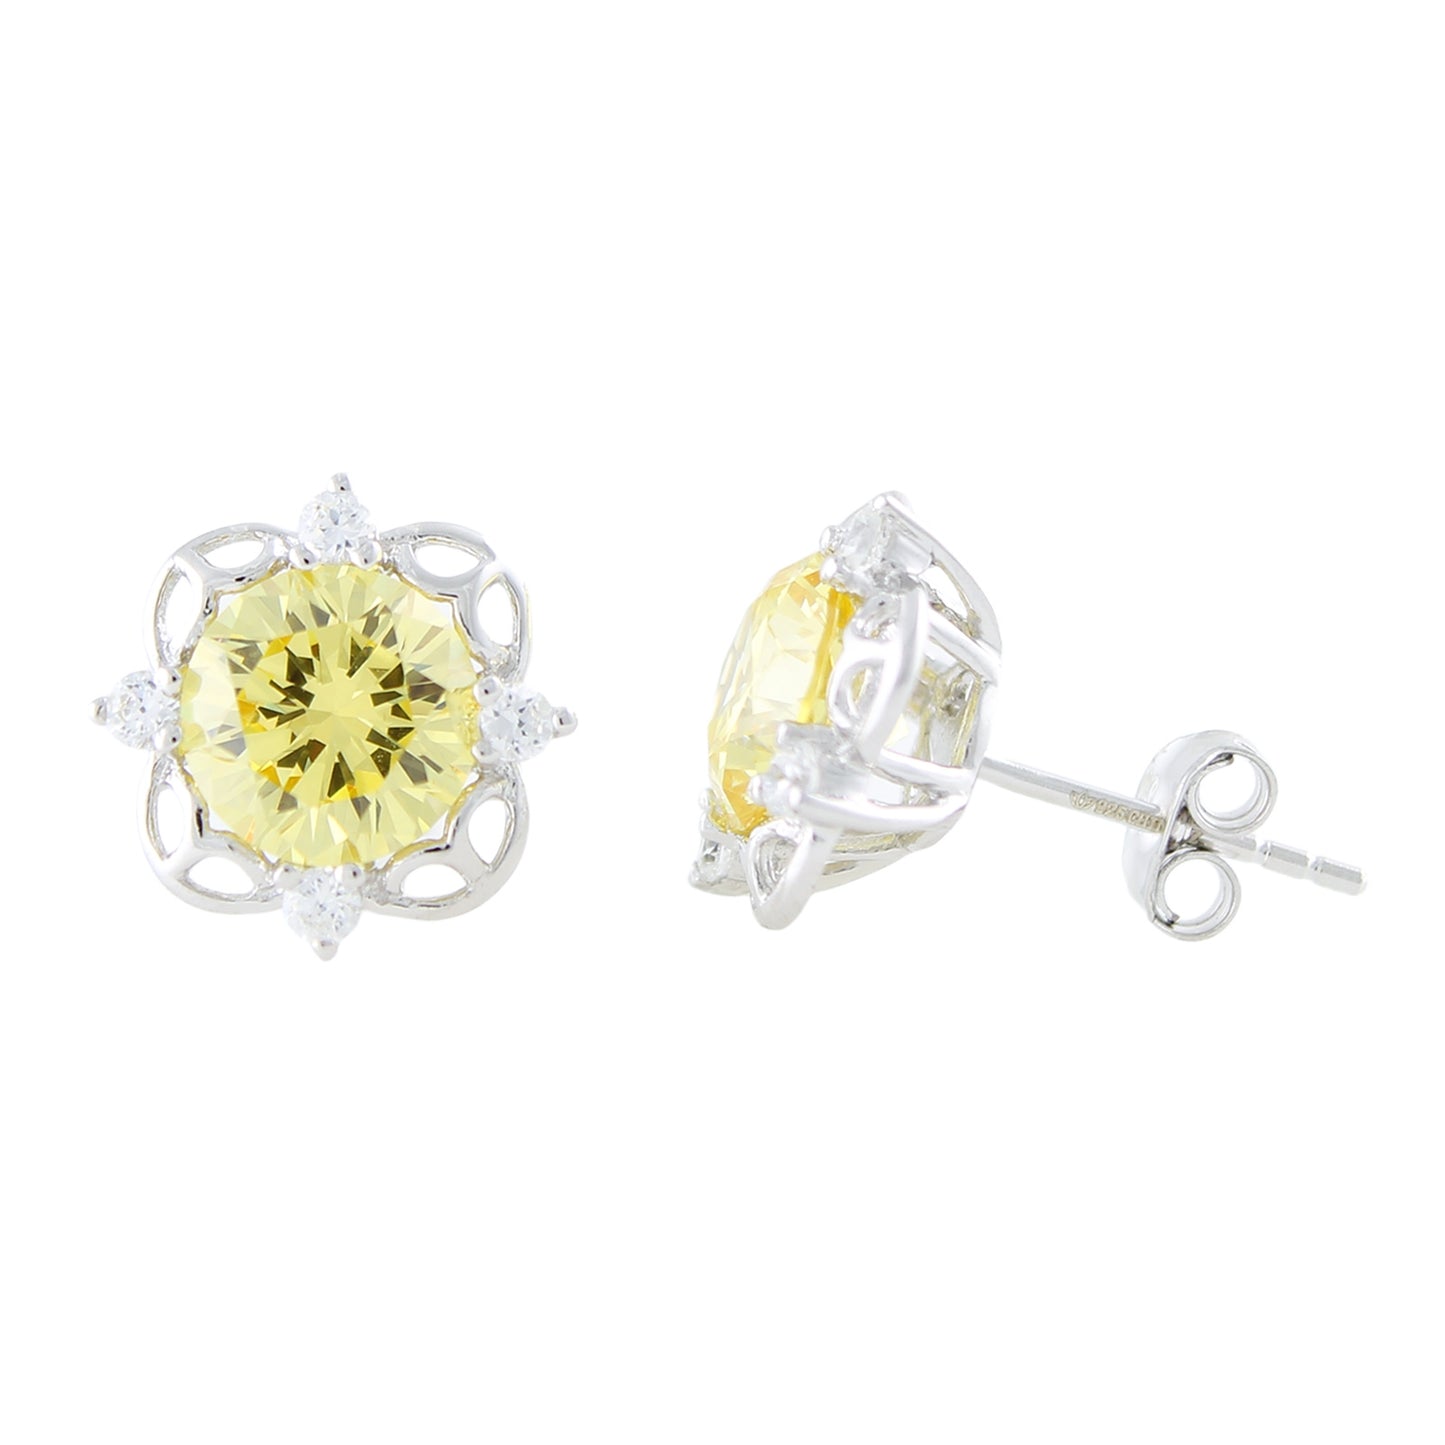 Pinctore Sterling Silver 4.86ctw Yellow Color CZ Studs Earring 0.37'L - pinctore